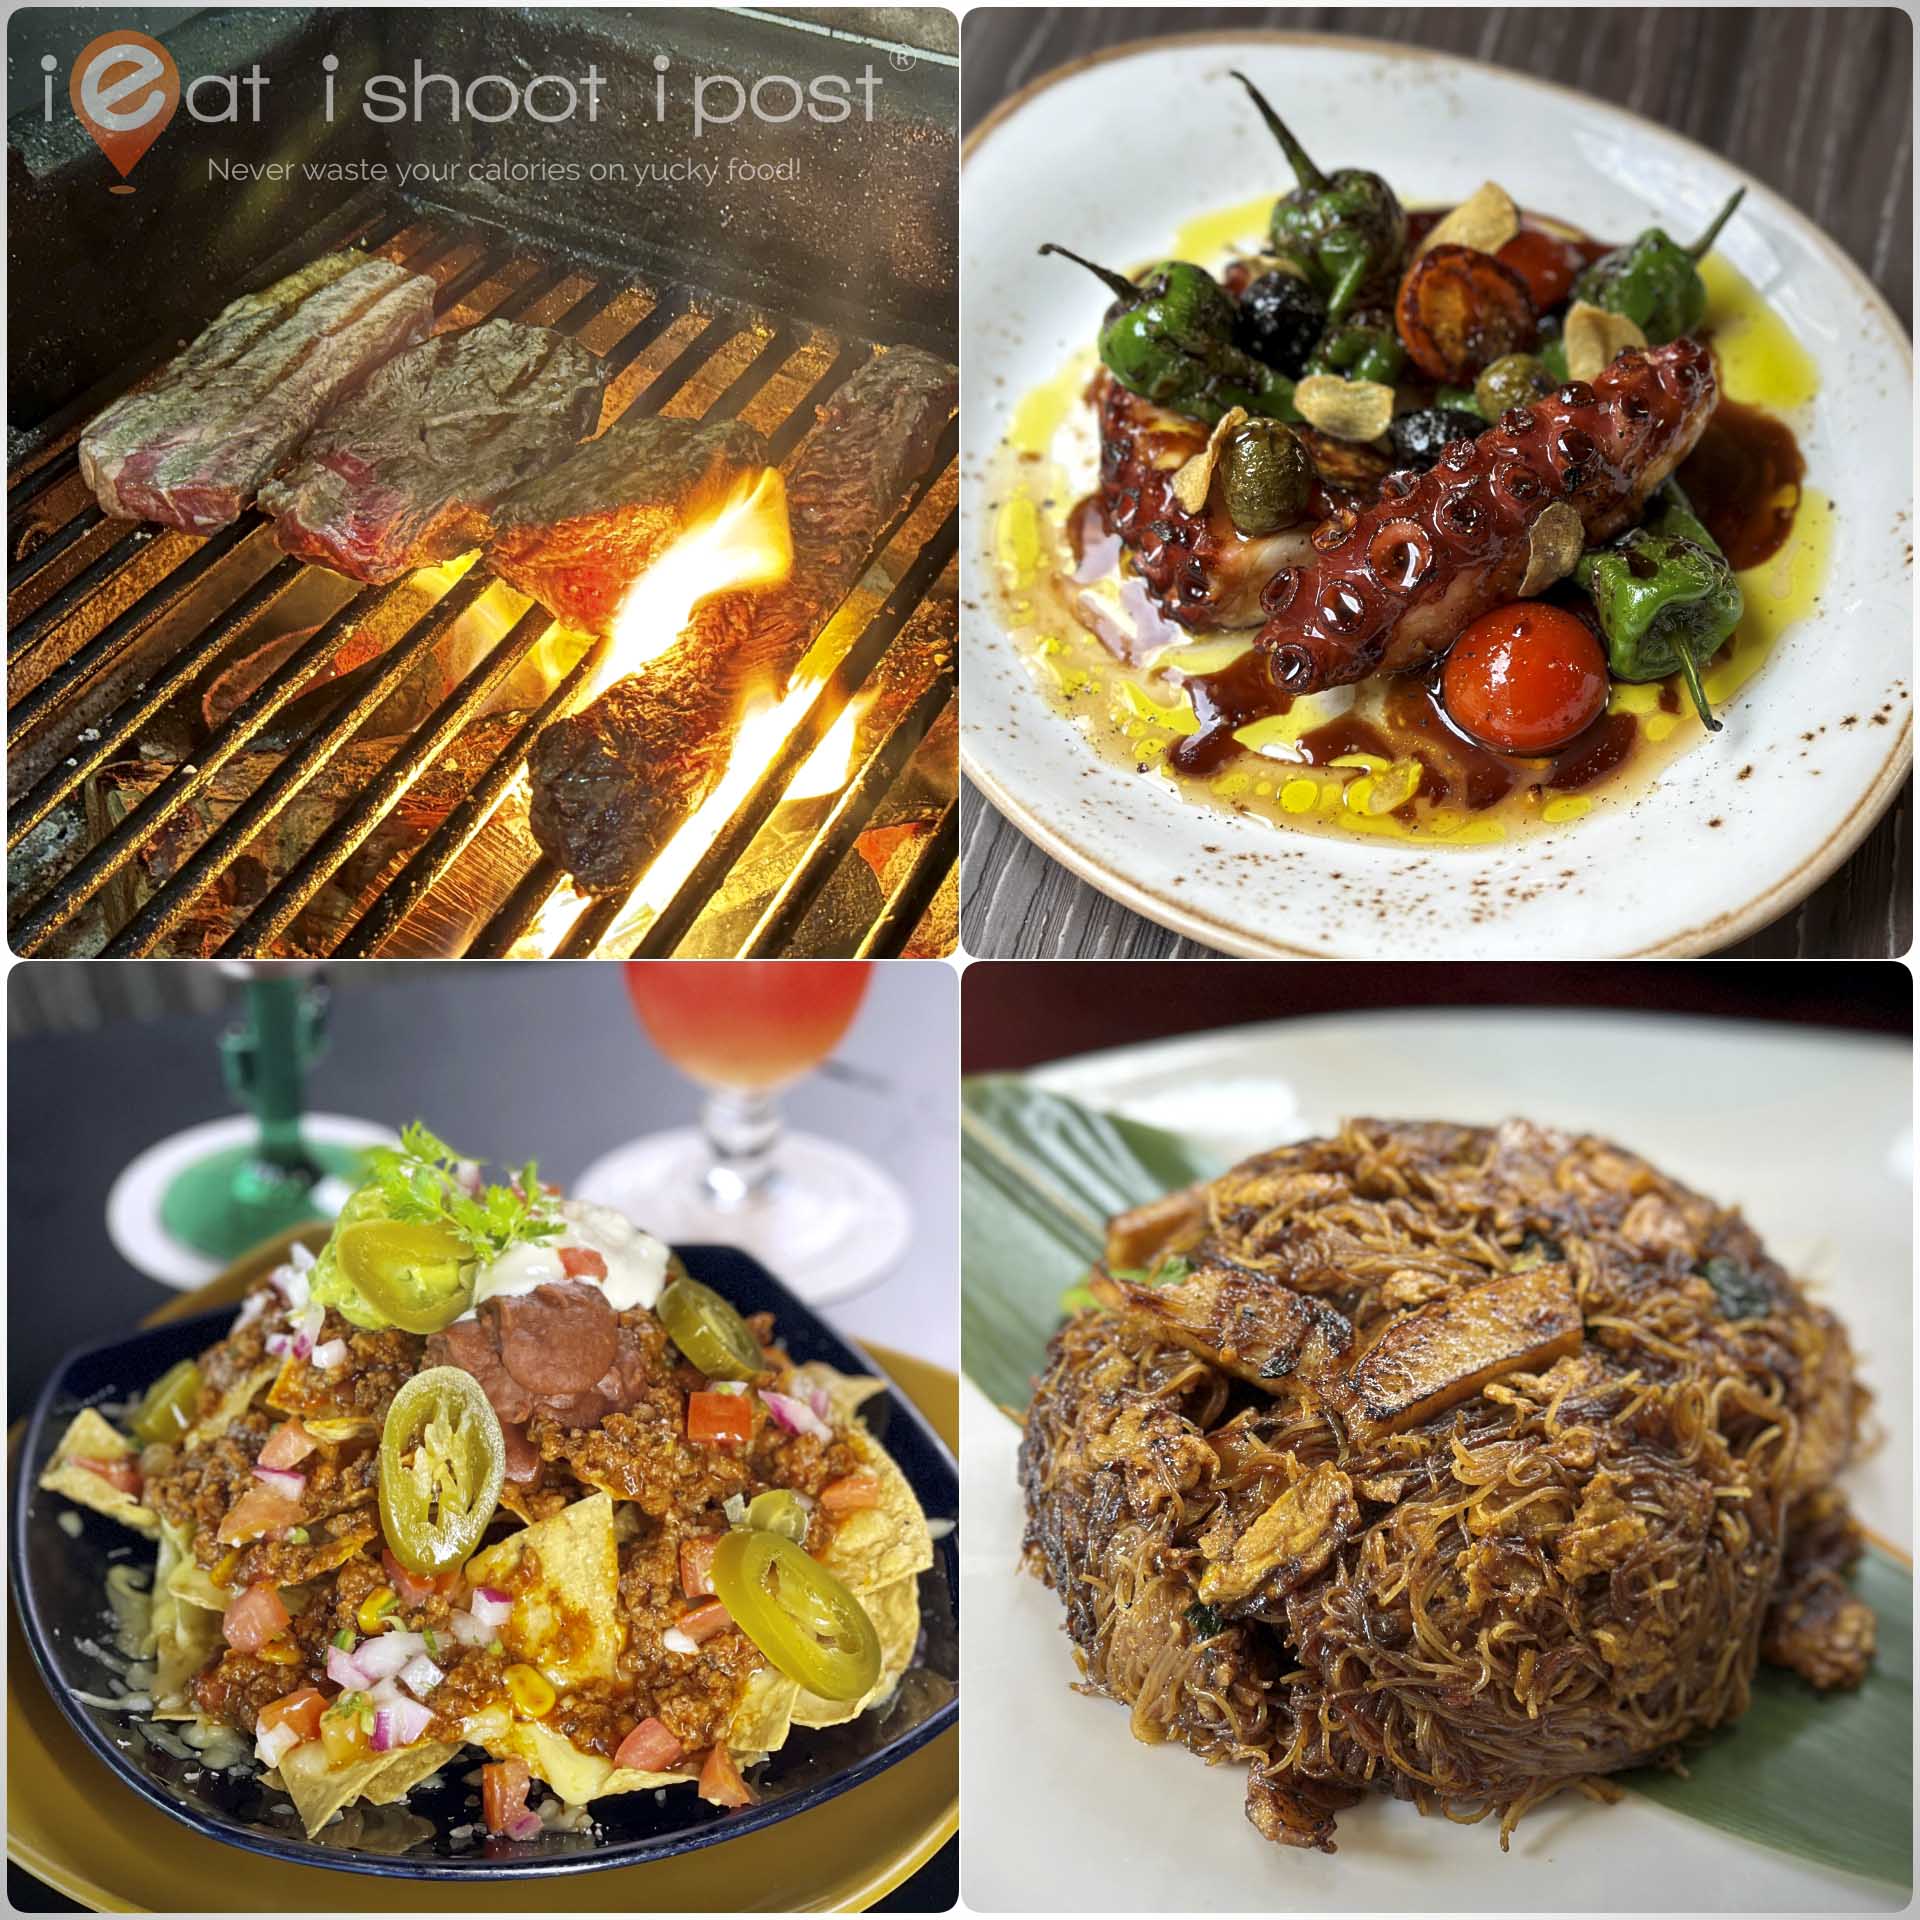 Food for Sharing Food Trail – with Citi Gourmet Pleasures